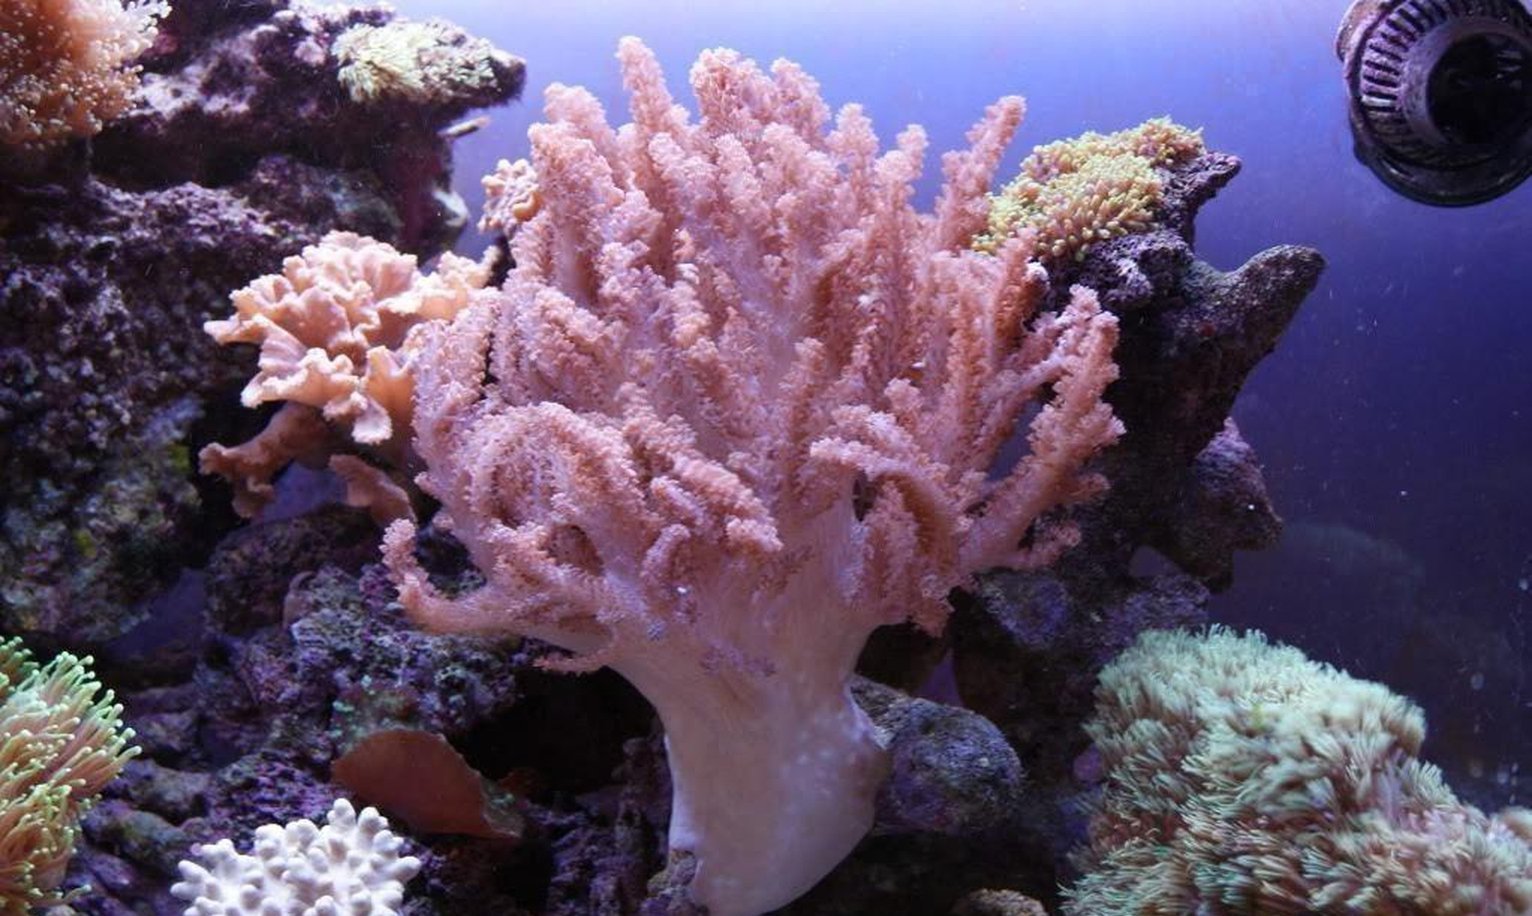 X2 Assorted Colt Soft Coral - Alcyonium Sp. - Med 3"-4"-Coral packages-www.YourFishStore.com